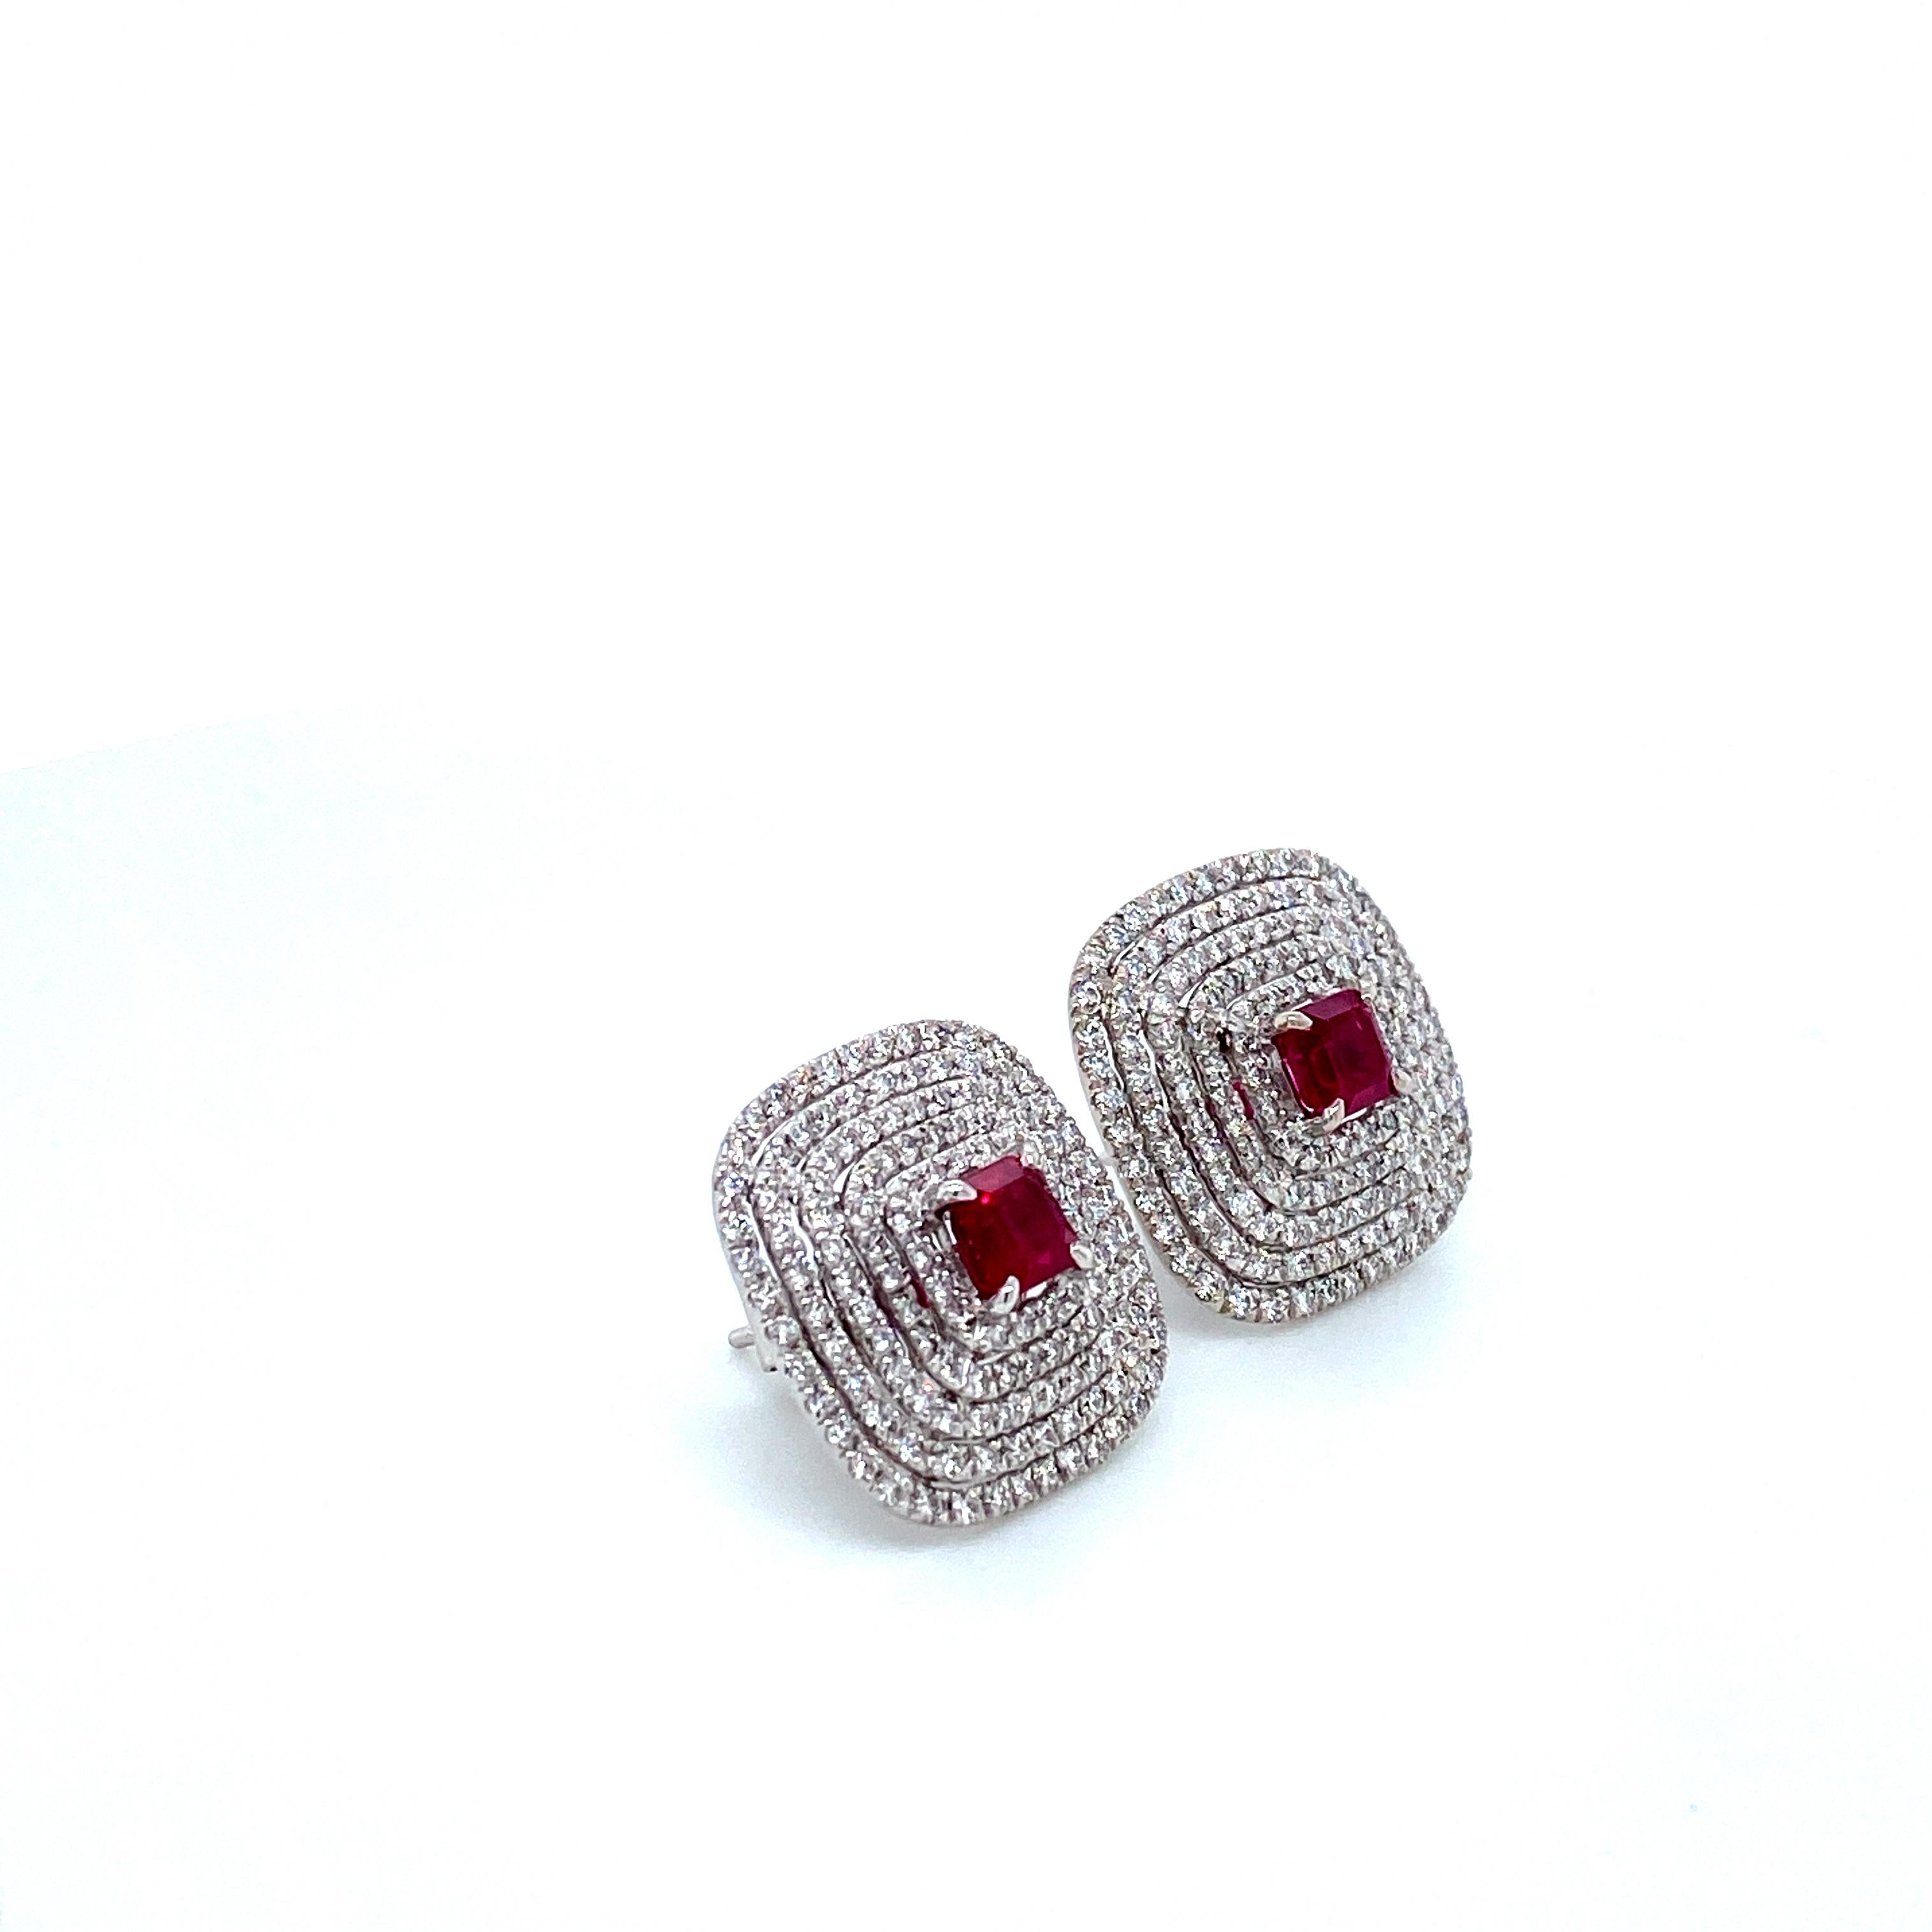 Contemporary 1.72 Carat Vivid Red Ruby and White Diamond Gold Earrings For Sale